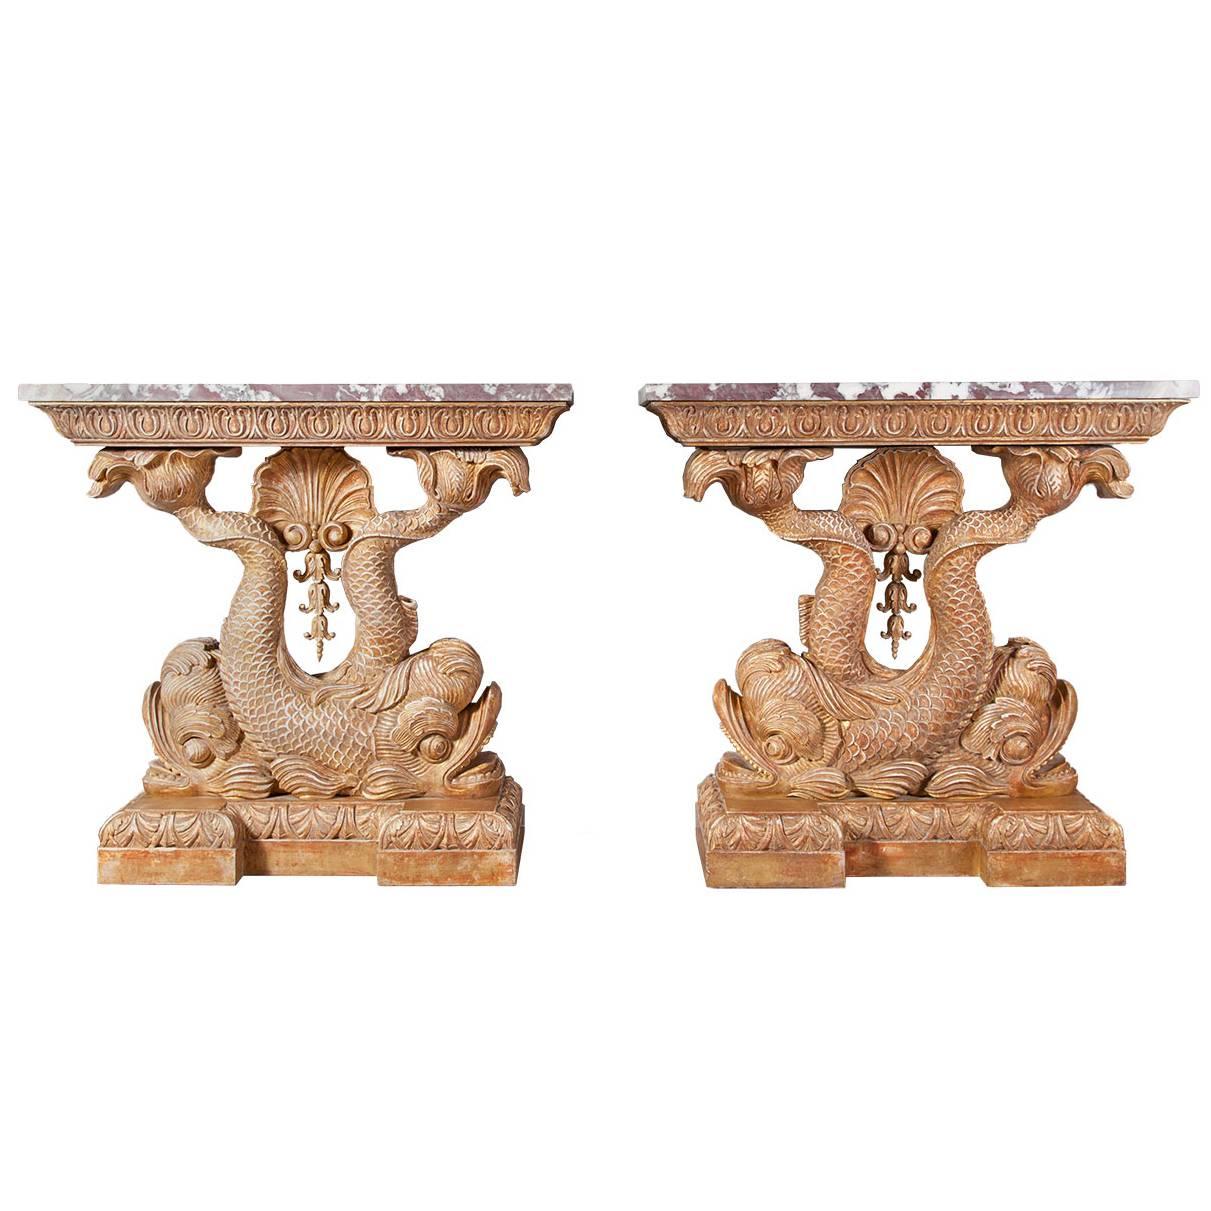 William Kent Style Giltwood Side Tables